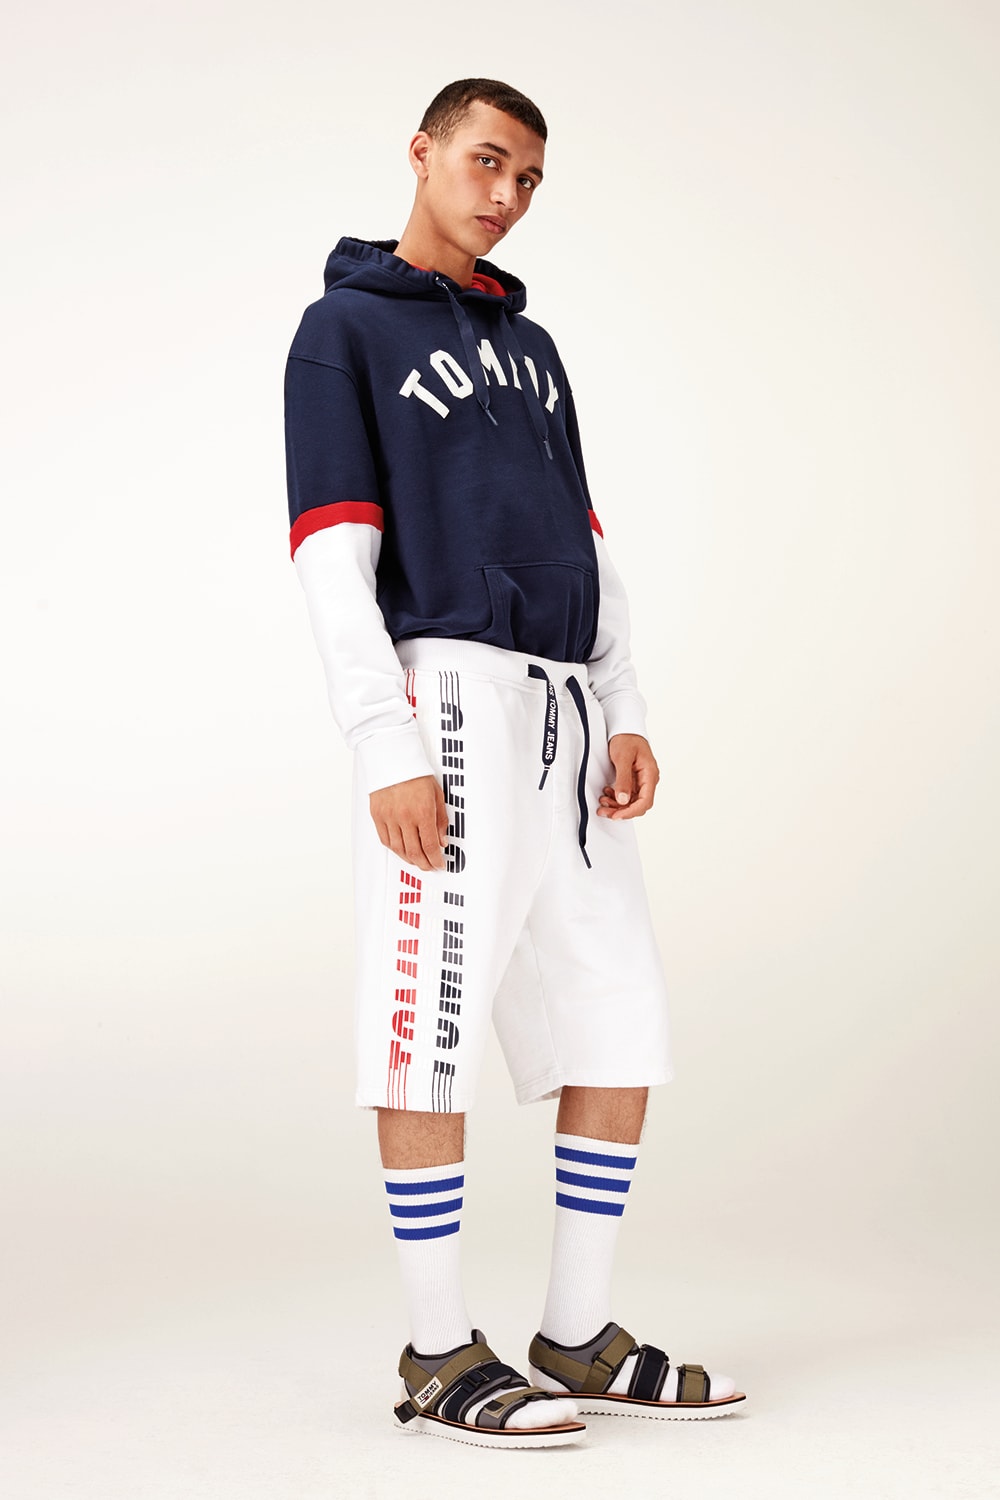 Tommy Jeans Spring Summer 2018 Collection lookbook tommy hilfiger